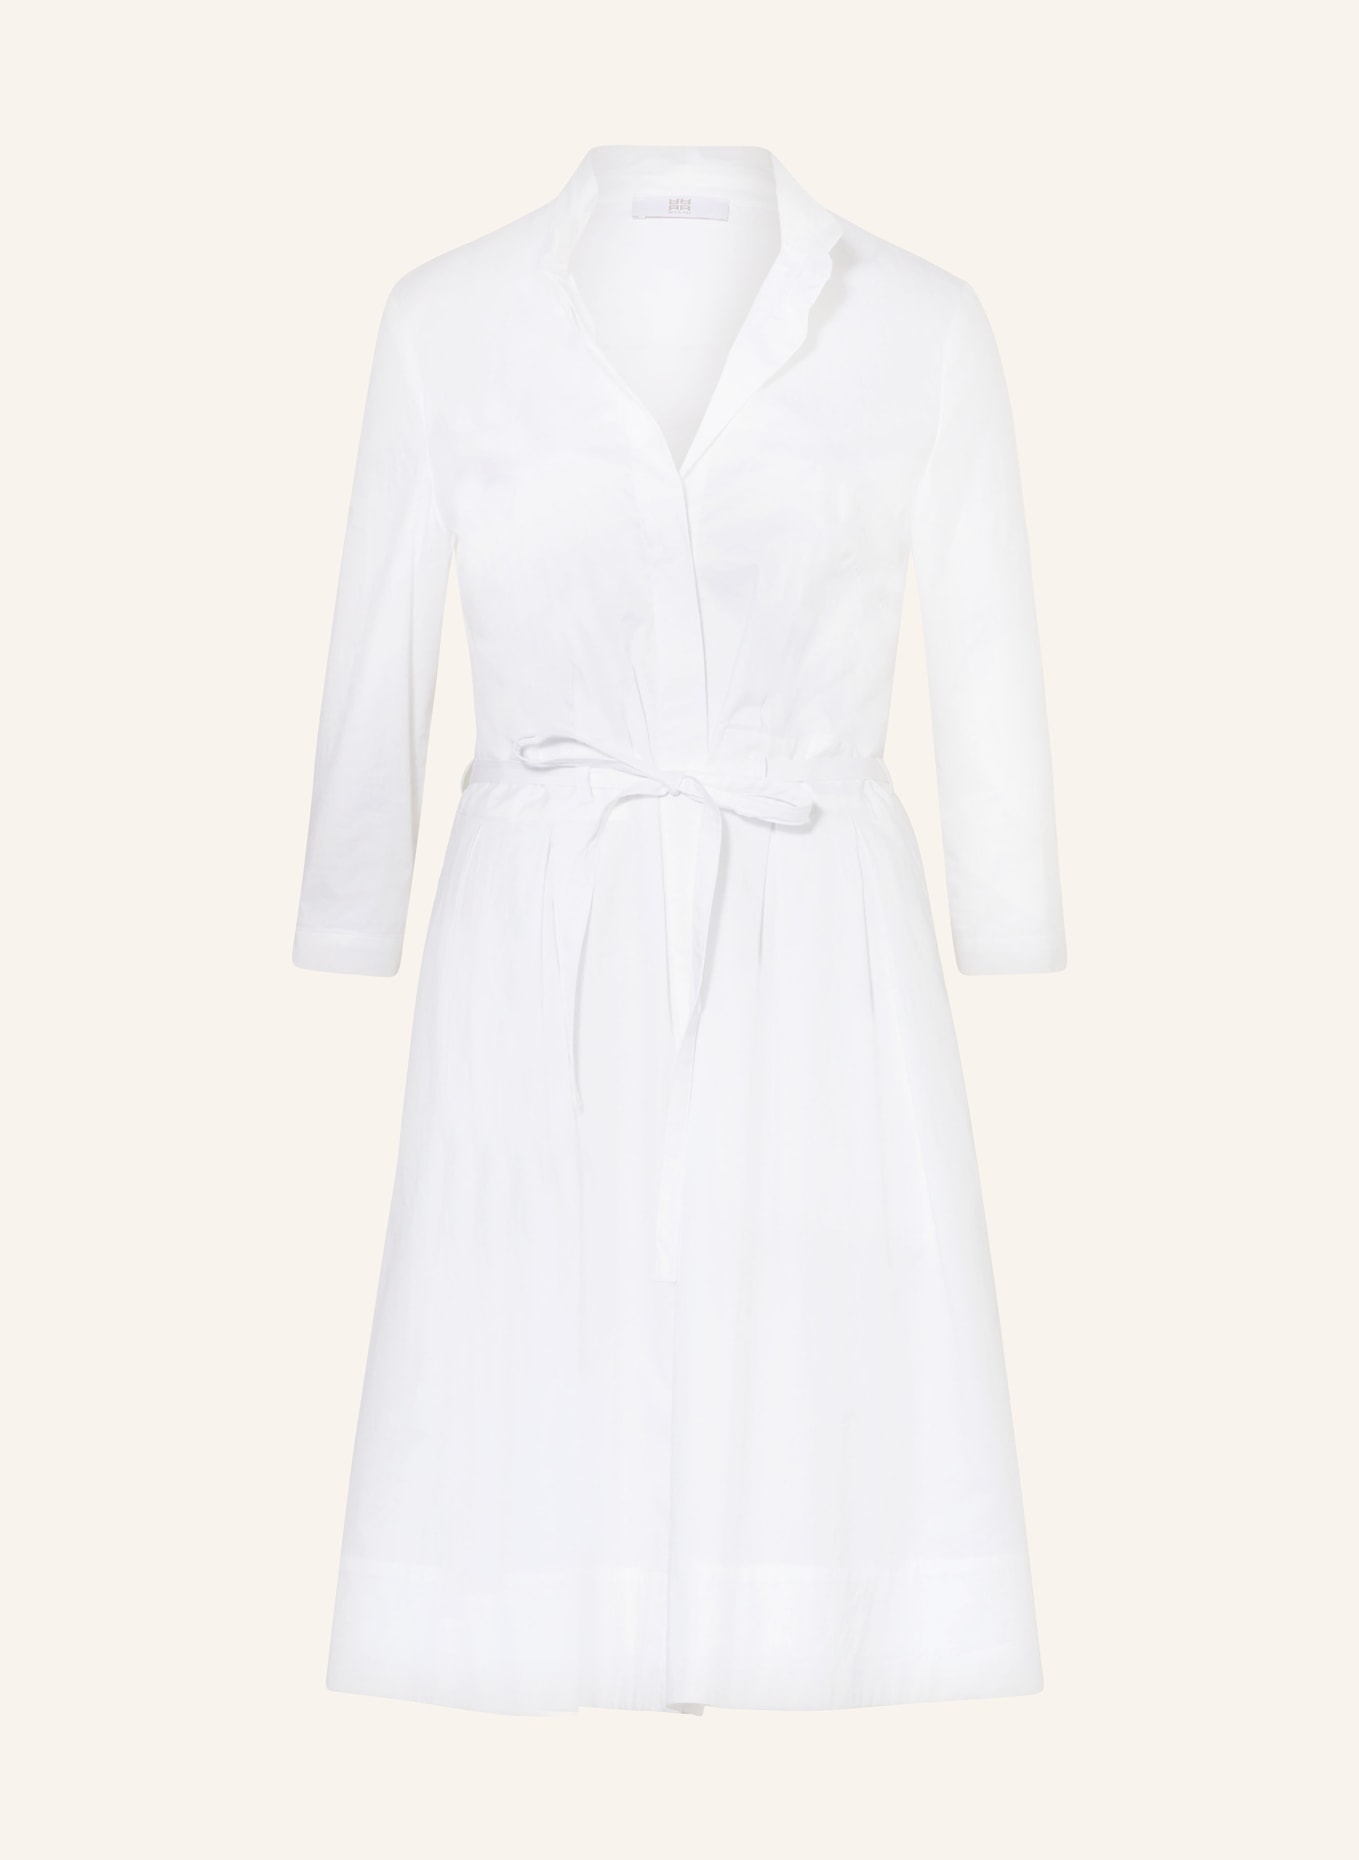 RIANI Shirt dress with 3/4 sleeves, Color: WHITE (Image 1)